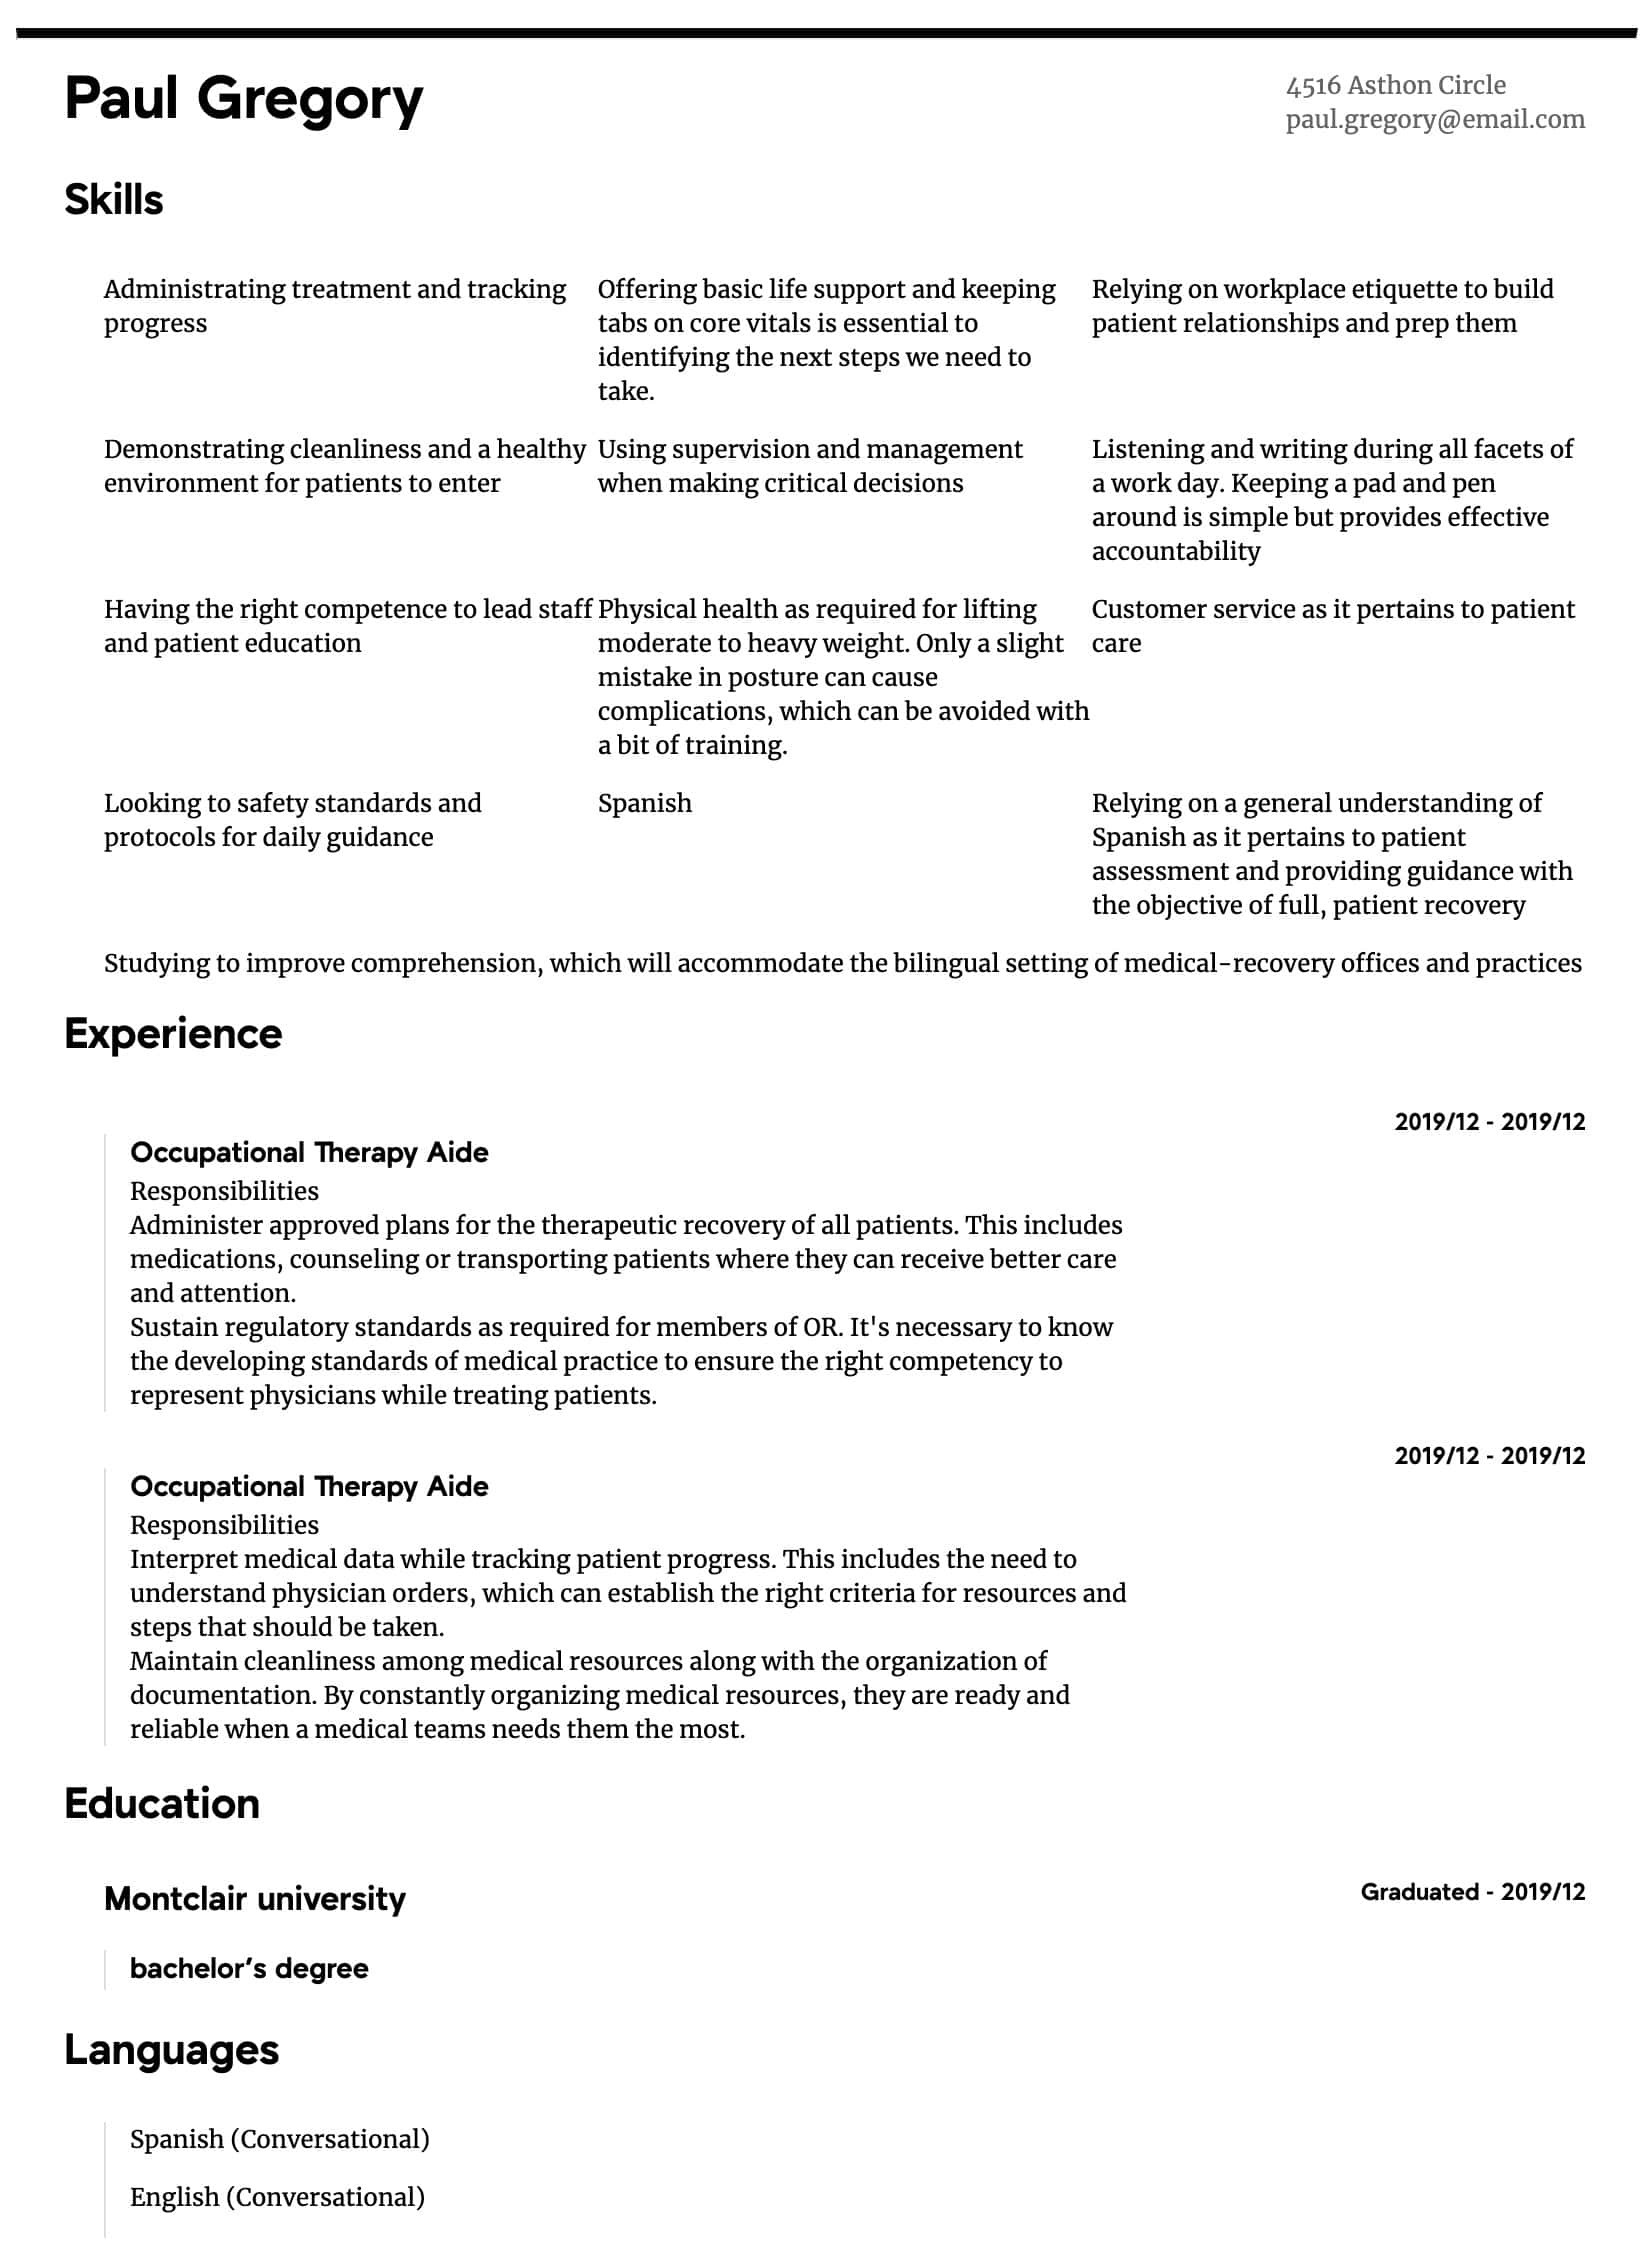 occupational therapy aide resume sample